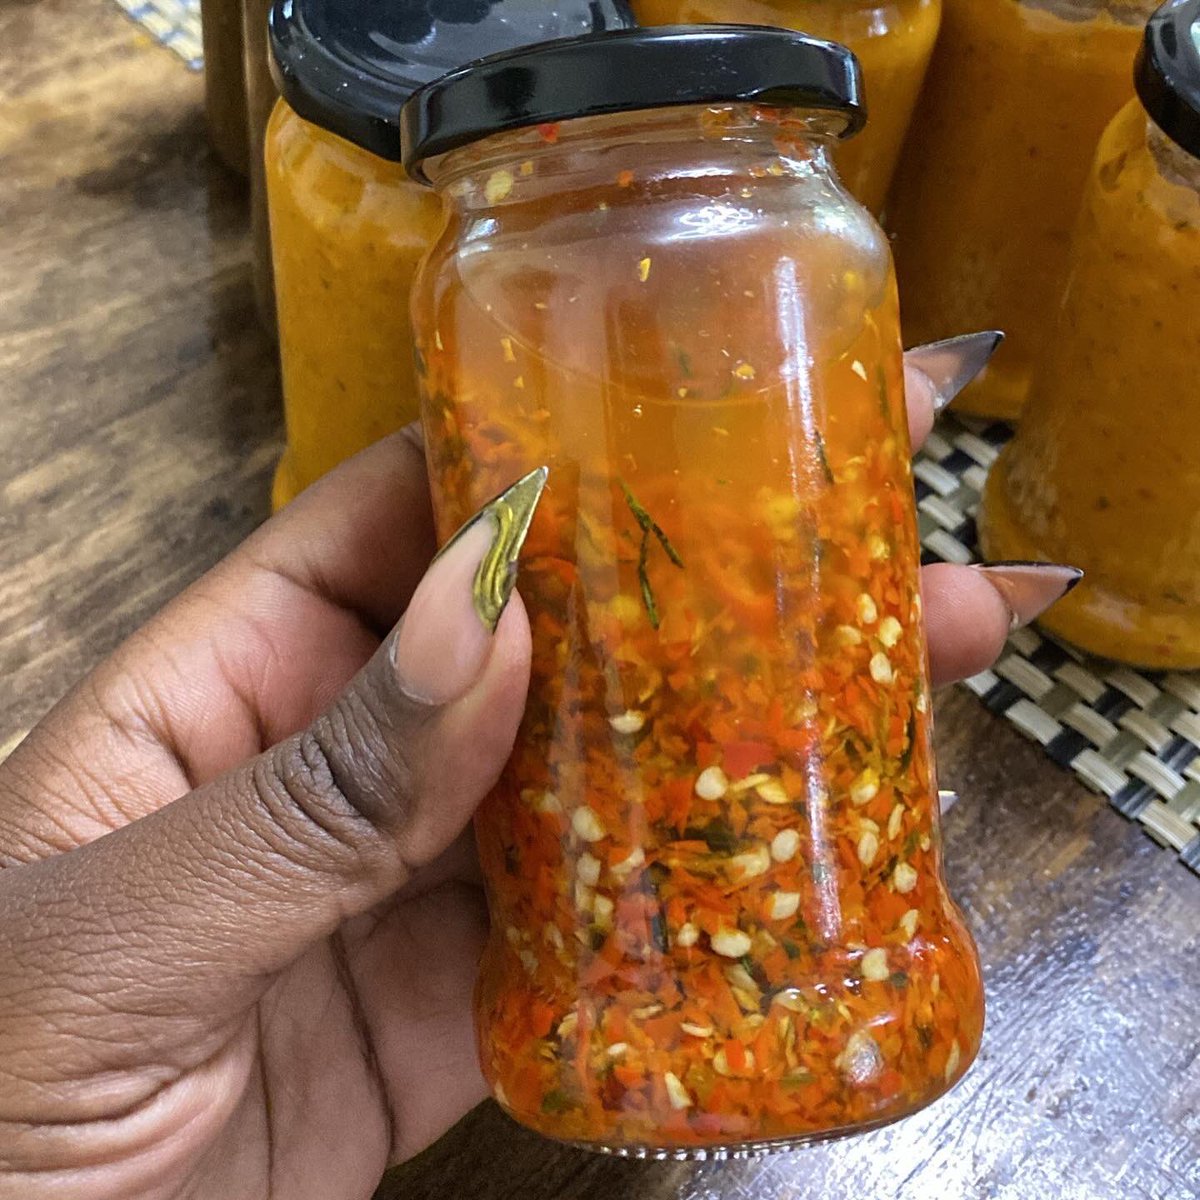 We are soon bringing flavorful sauces to your homes!
Every meal goes so well with a delicious well made sauce!
And we are right at the heart of formulating sauces for your meals 
• homemade chilli sauce 
• ⁠tamarind (ukwaju ) sauce 
• ⁠chilli oil
Proverbs 16:3